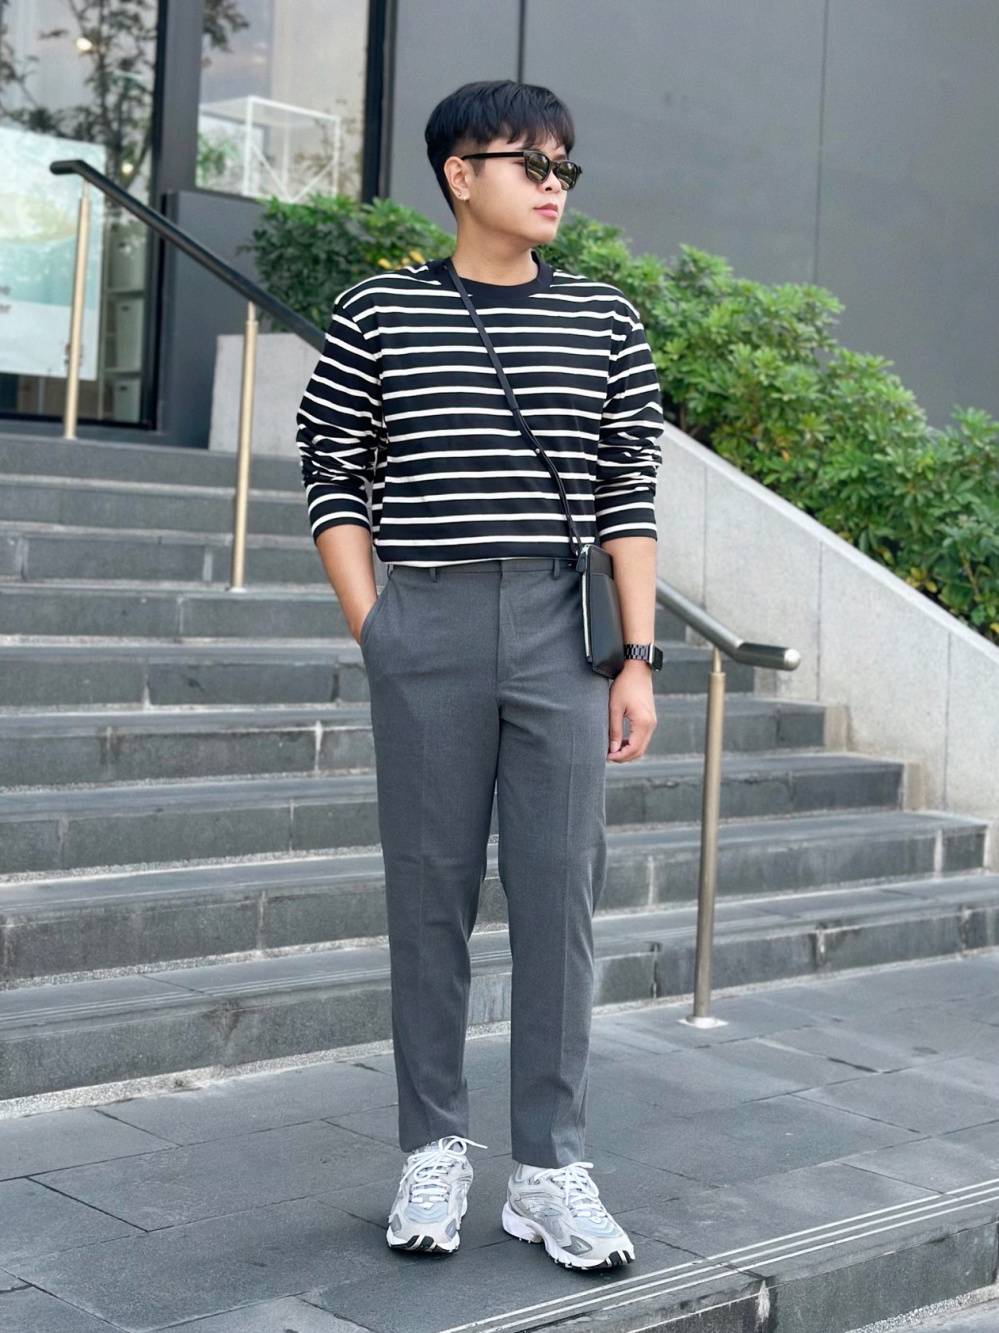 Check styling ideas for「Smart Ankle Pants (Wool Like - Regular Length 64.5  - 70.5 cm)*」